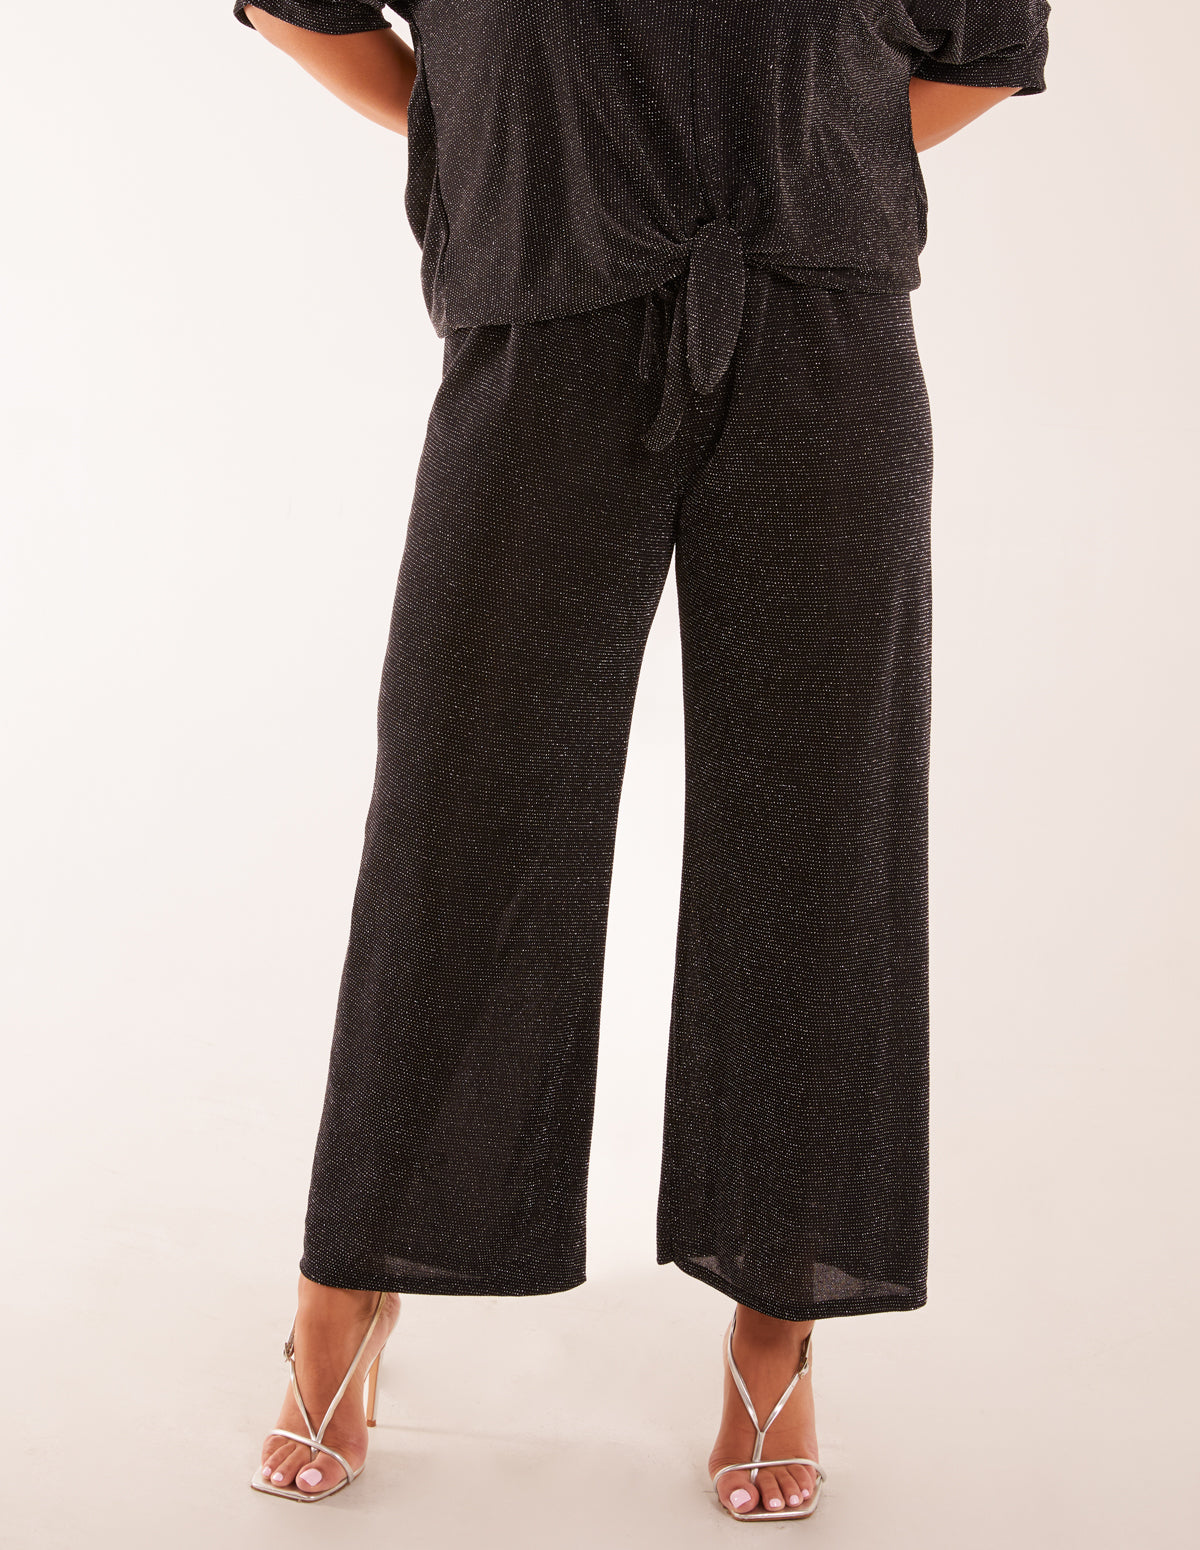 Sparkly Elasticated Waist Wide Leg Trousers - S/M / BLACK/SILVER